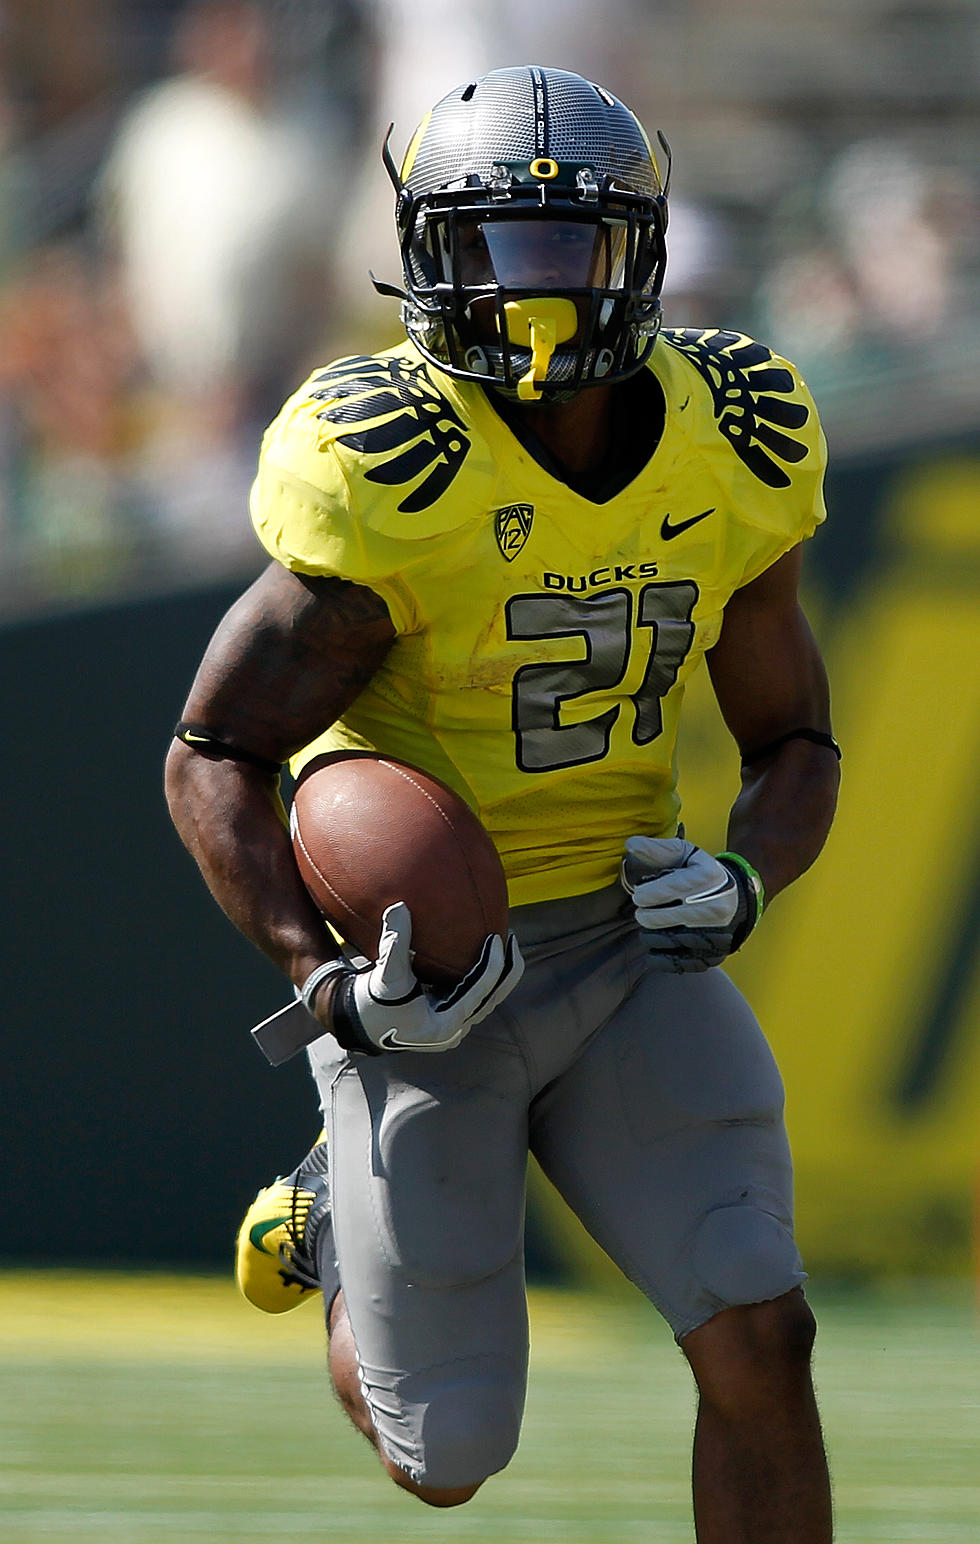 College Football Uniforms Are Gettin’ Funky! [PHOTOS]